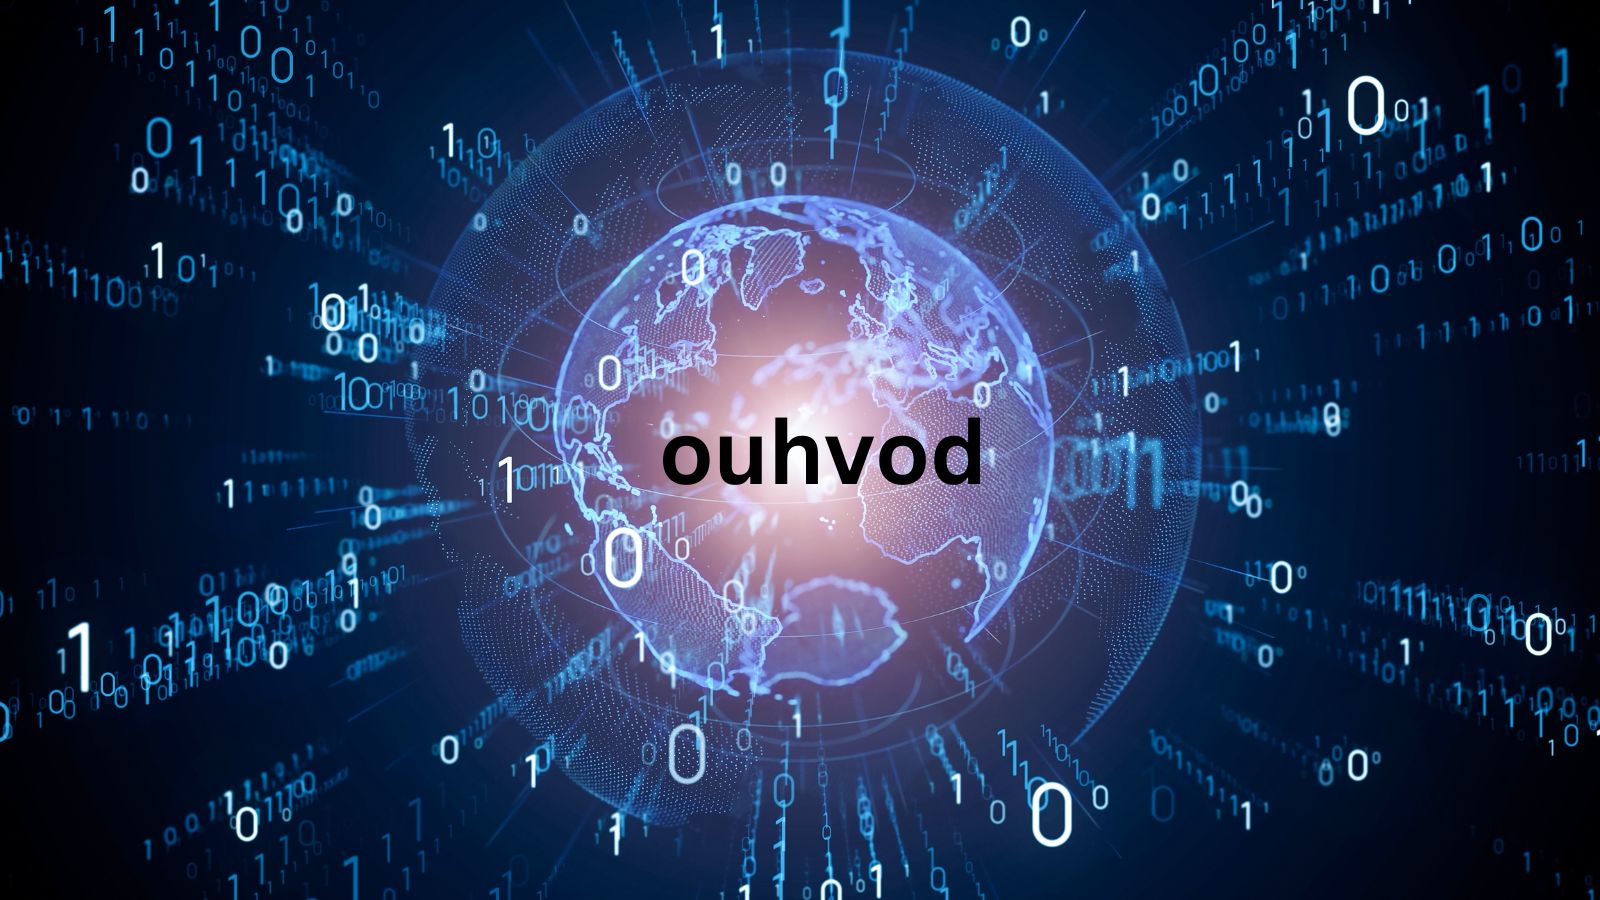 Ouhvod: Everything You Need to Know